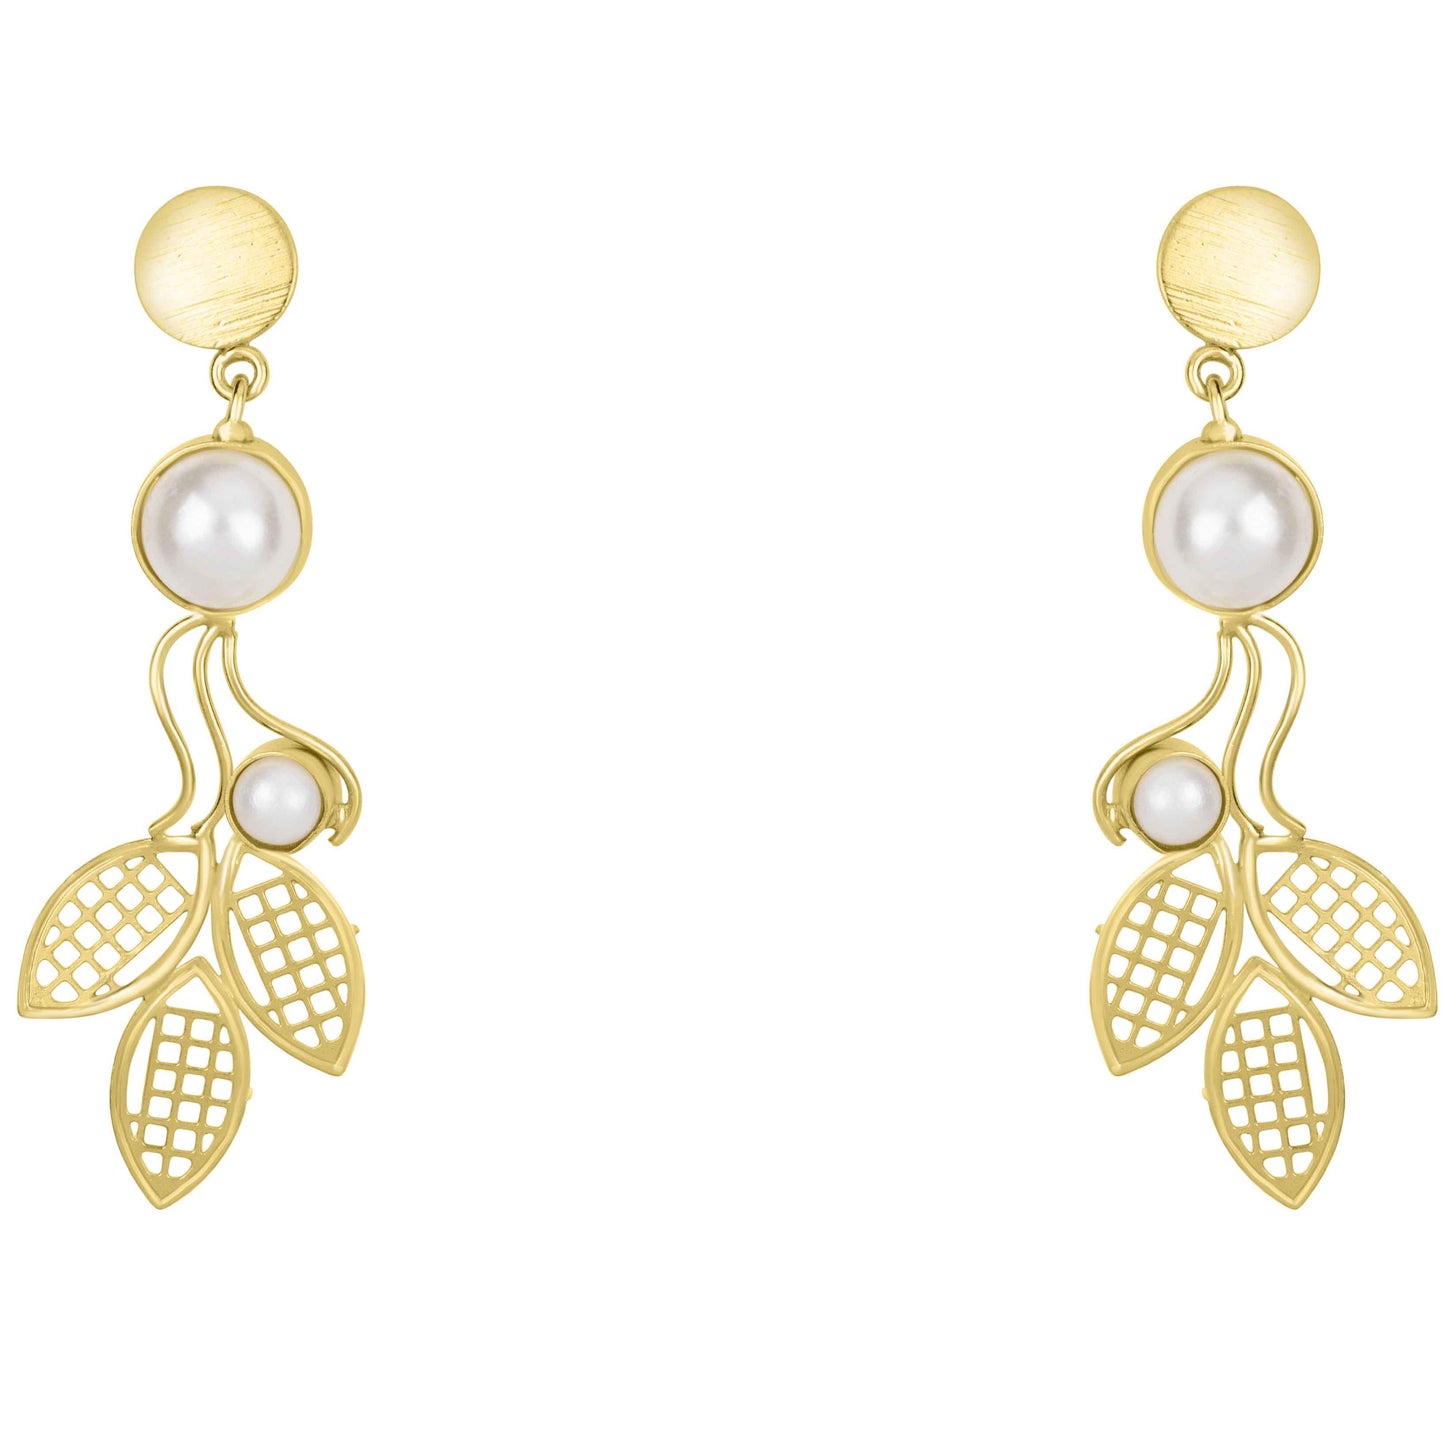 Bdiva 18K Gold Plated Light Weight Leaf Pearl Danglers.